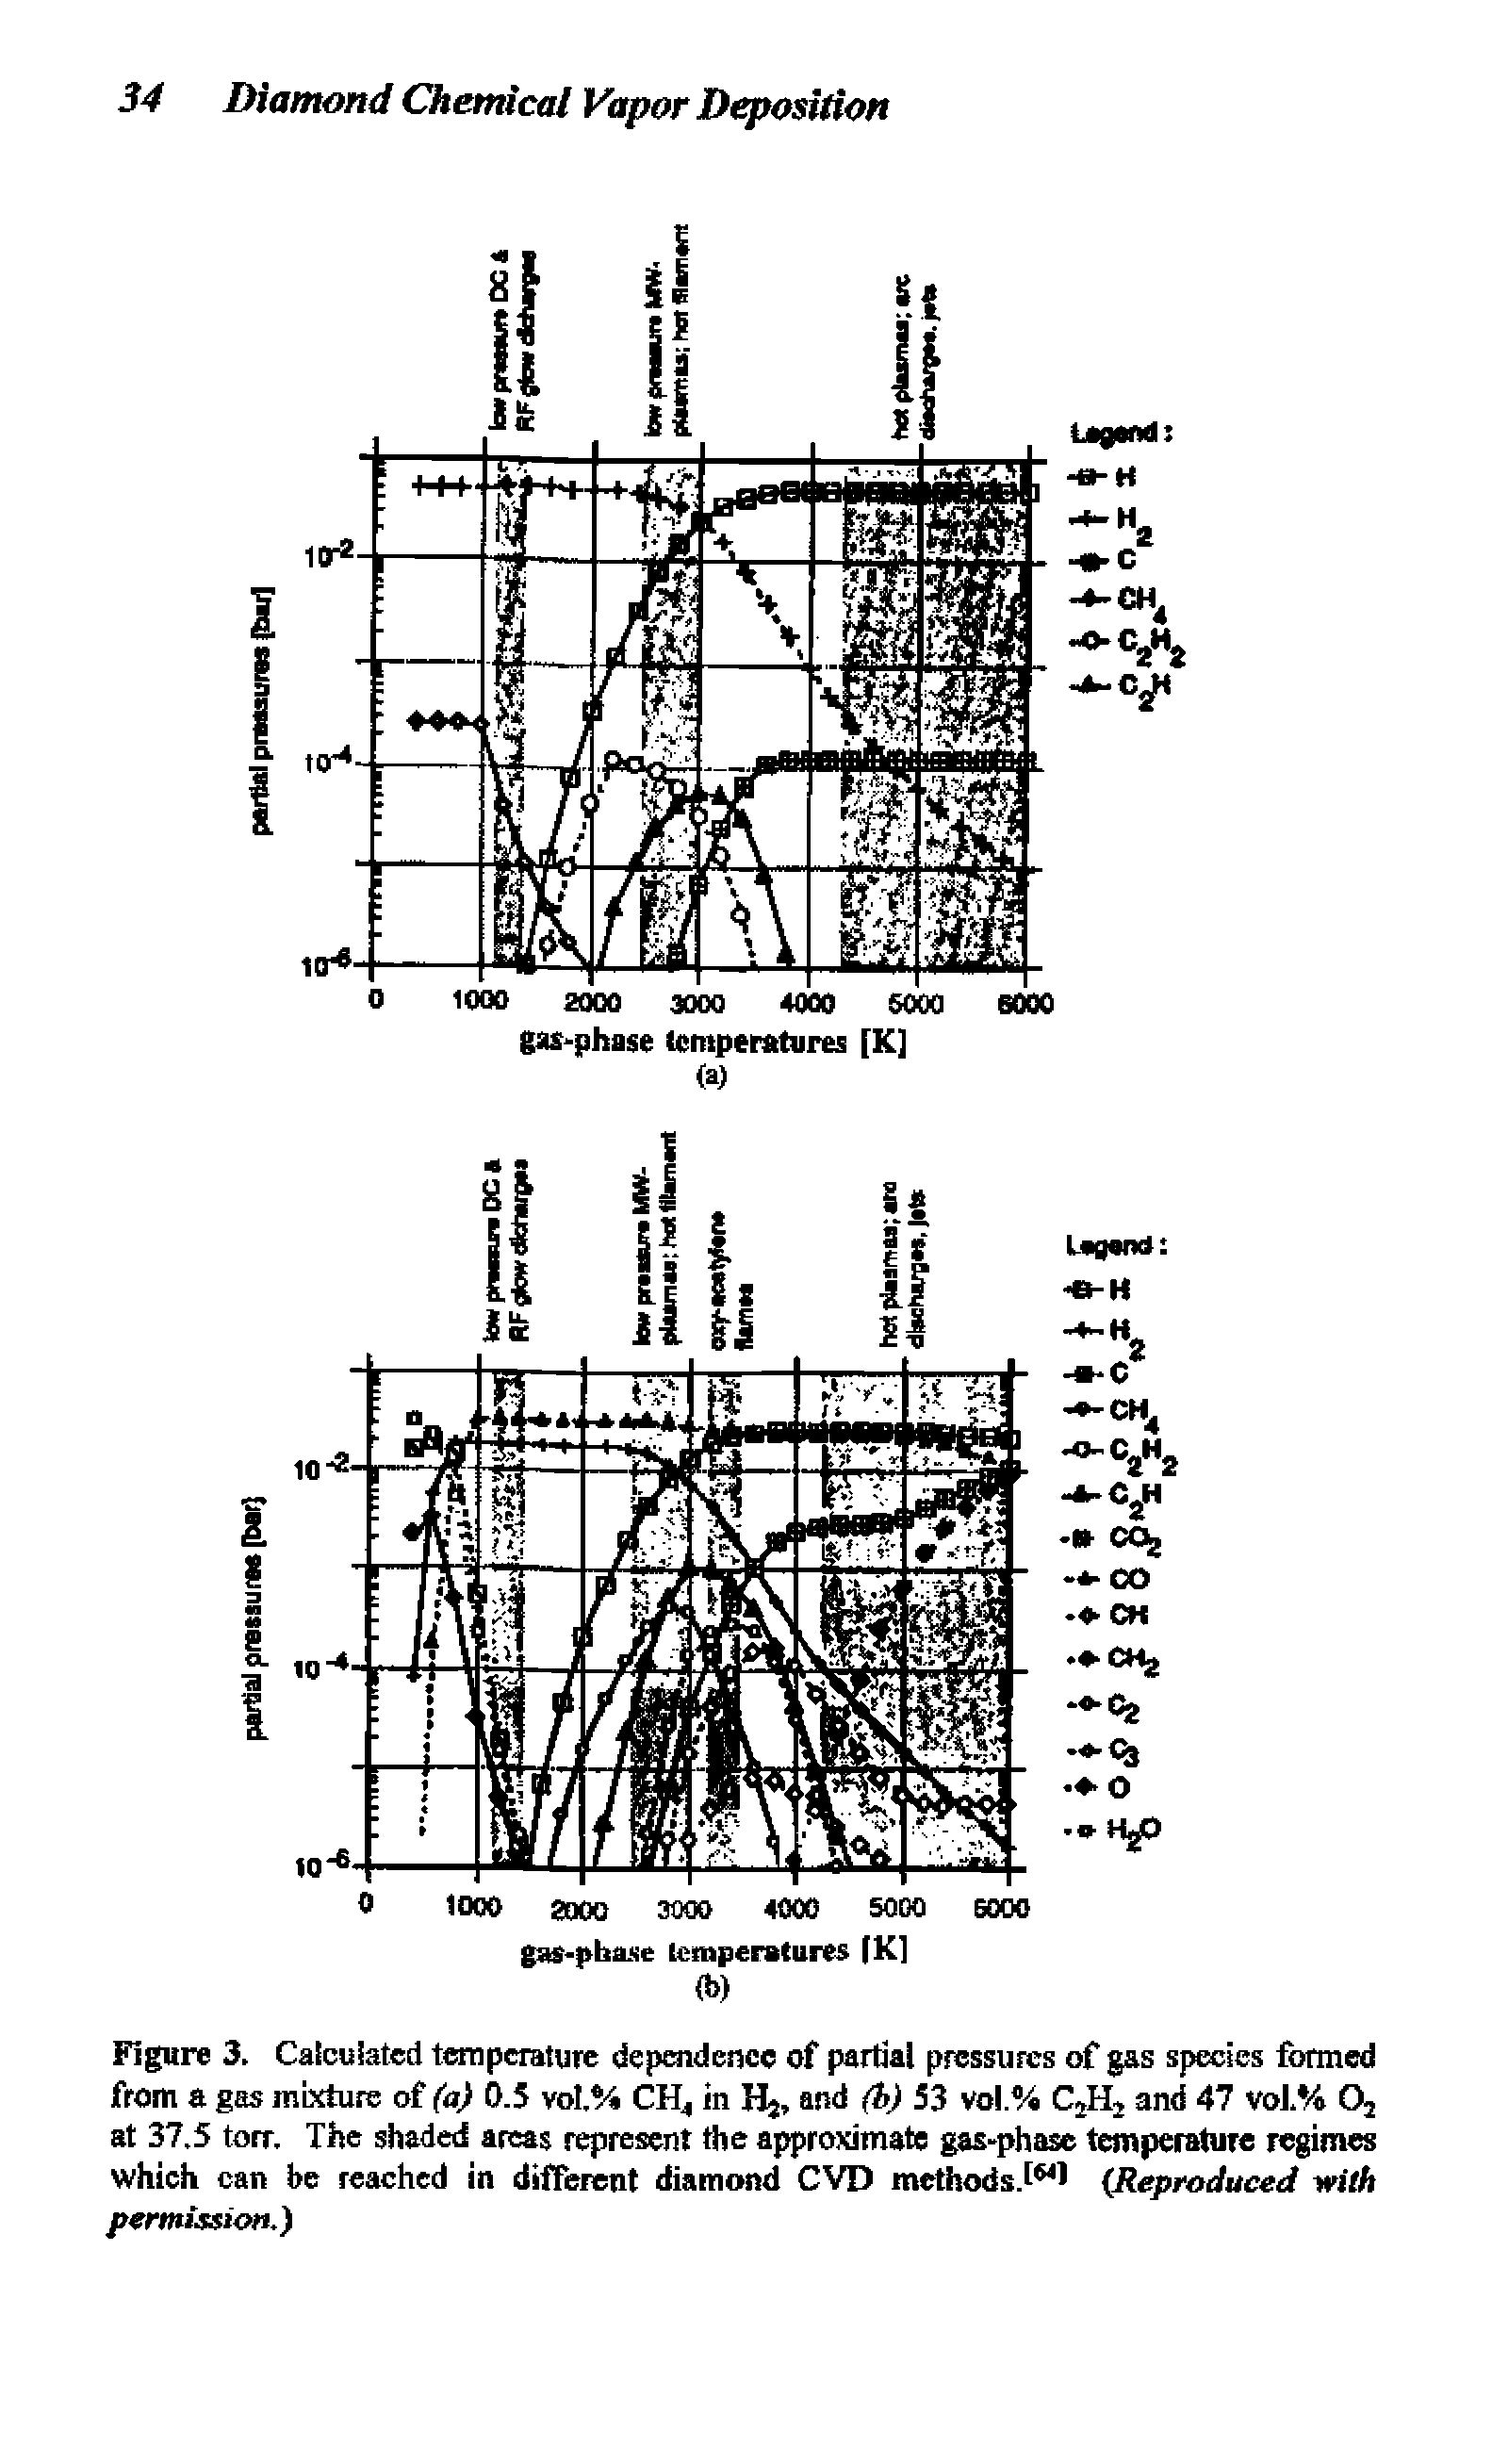 Figure 3. Caicuiated tempcratuie depraidencc of partial pressures of gas species formed from a gas mixture of (aj 0.5 vol.% Clf, in Hj, and d>) 53 vol.% and 47 voJ.% O3 at 37,5 torr. The shaded areas represent ttie approximate gas-phase temperature regimes which can be reached in different diamond CVD methods.l i (Reproduced with permission.)...